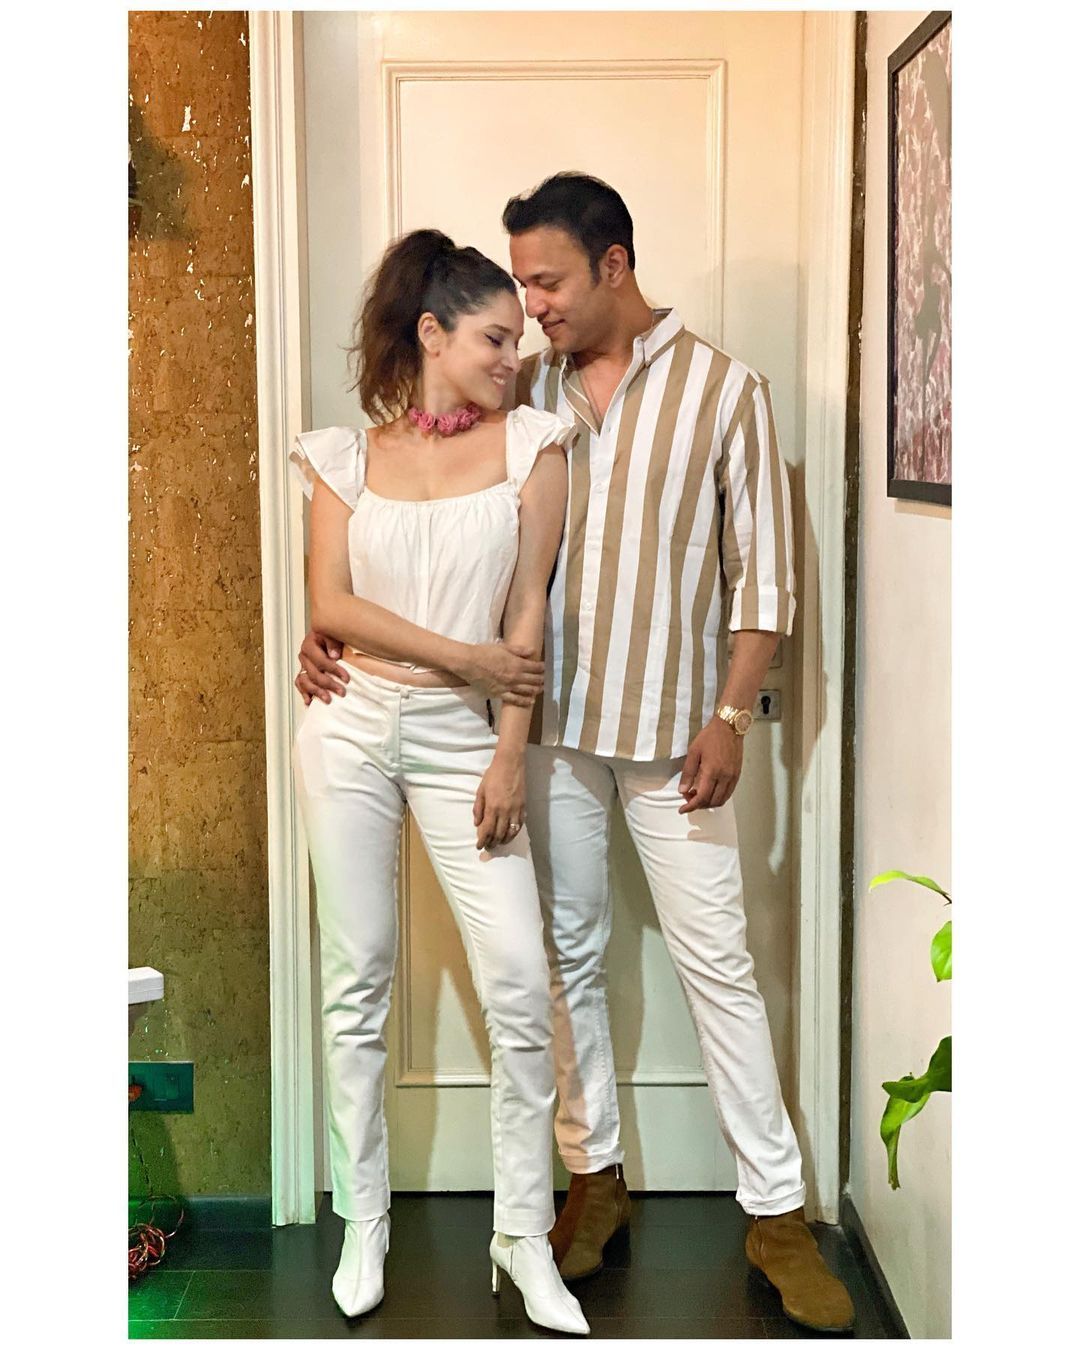 Ankita Lokhande Celebrates 3 Years Of Her Relationship With Boyfriend Vicky Jain, Shares Their Journey Through A Special Video